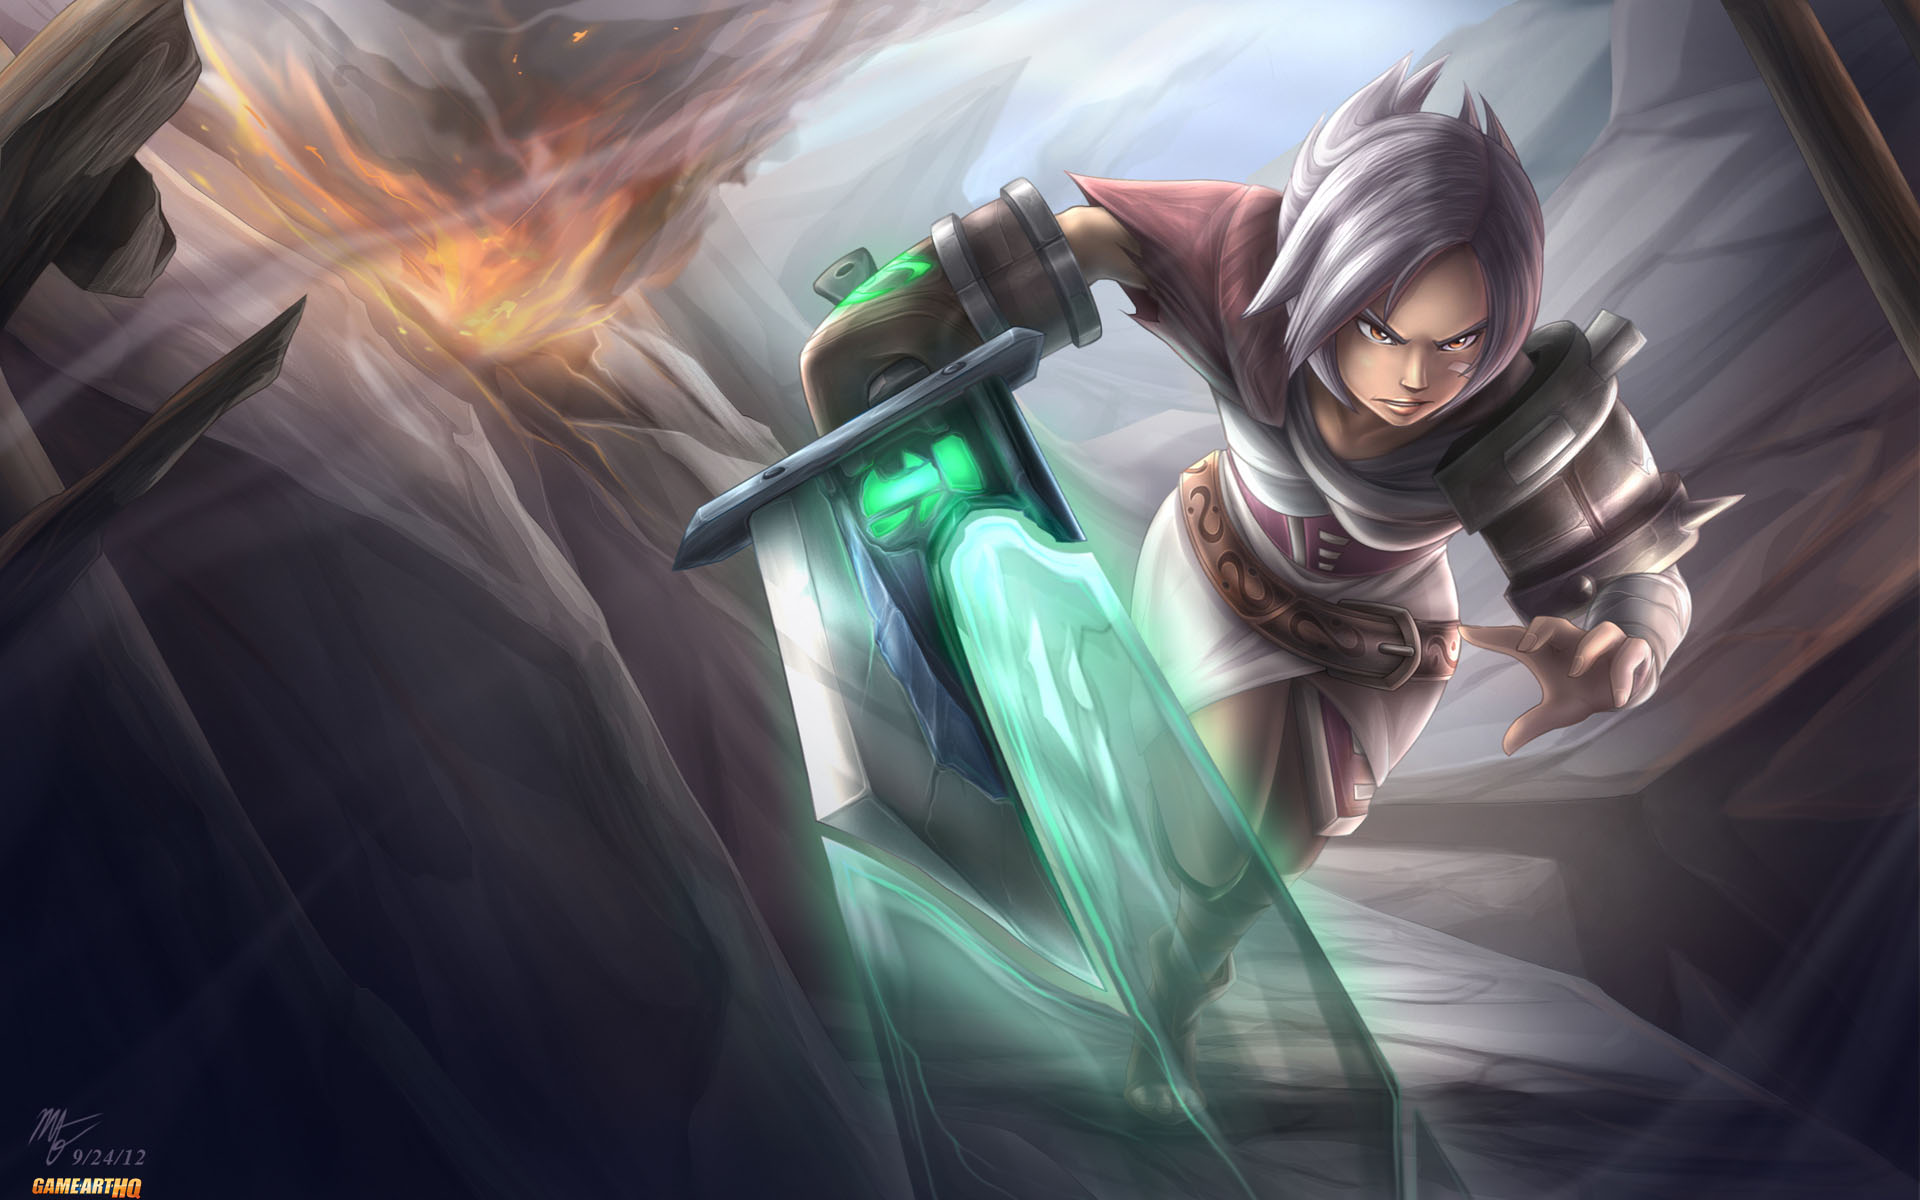 Riven, the Exile